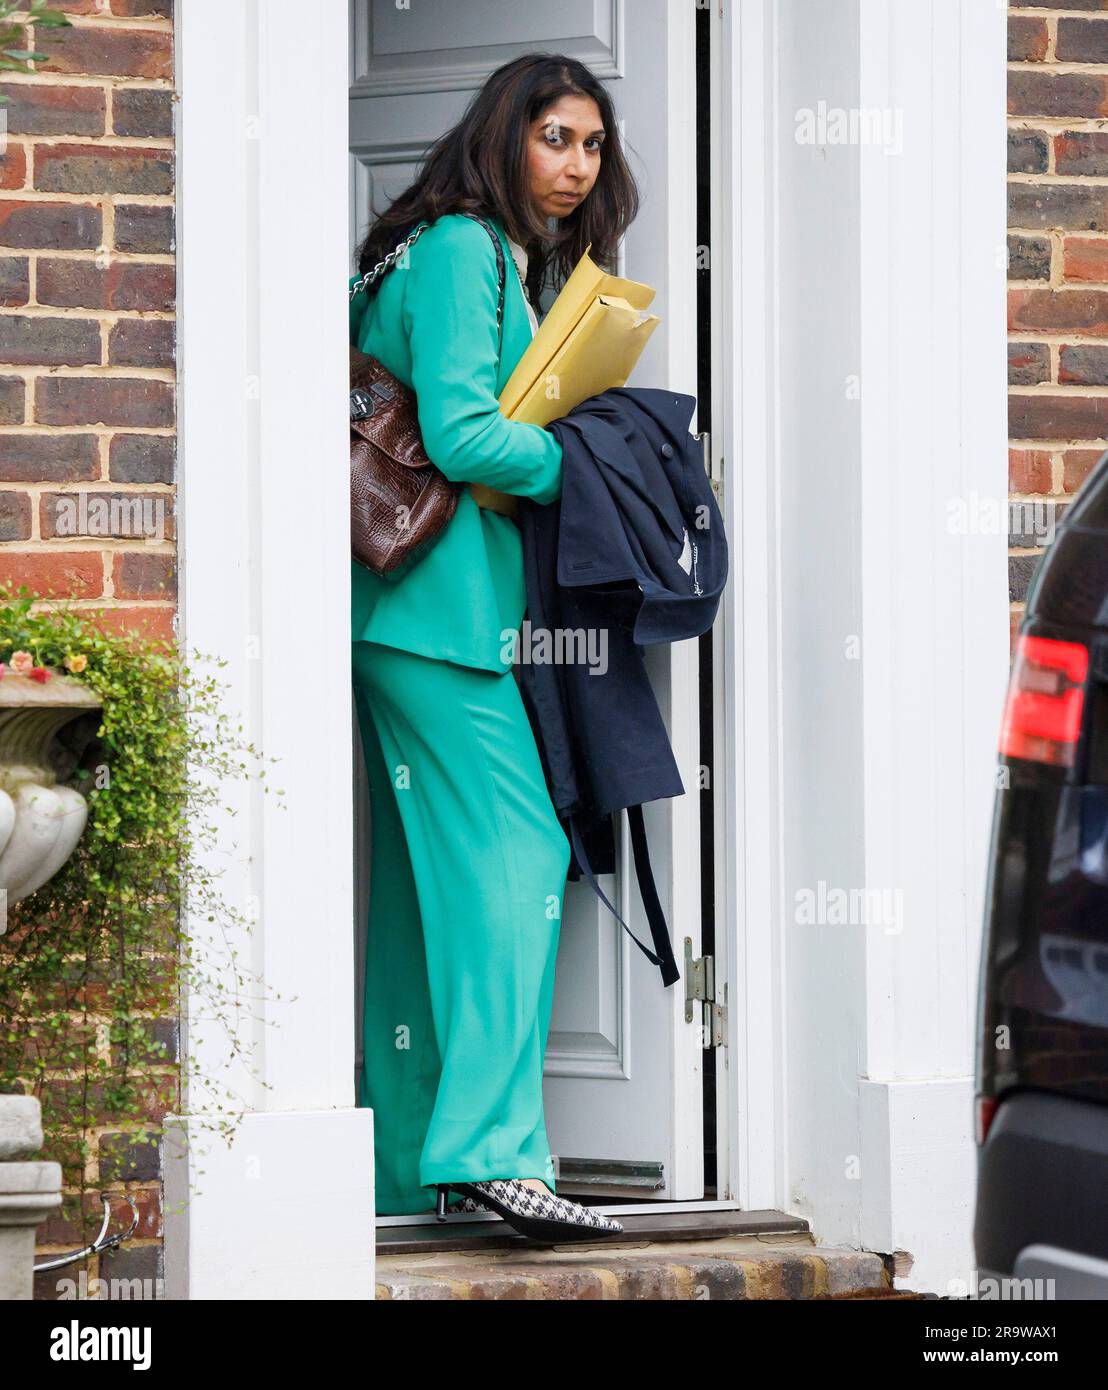 Hertfordshire, UK. 29th June, 2023. Home Secretary SUELLA BRAVERMAN is seen leaving her Hertfordshire home. Later today (Thurs) The Court of Appeal will deliver a ruling on the government's planned Rwanda policy, which could pave the way for flights to deport migrants to Rwanda as early as September. Photo credit: Ben Cawthra/Sipa USA Credit: Sipa USA/Alamy Live News Stock Photo